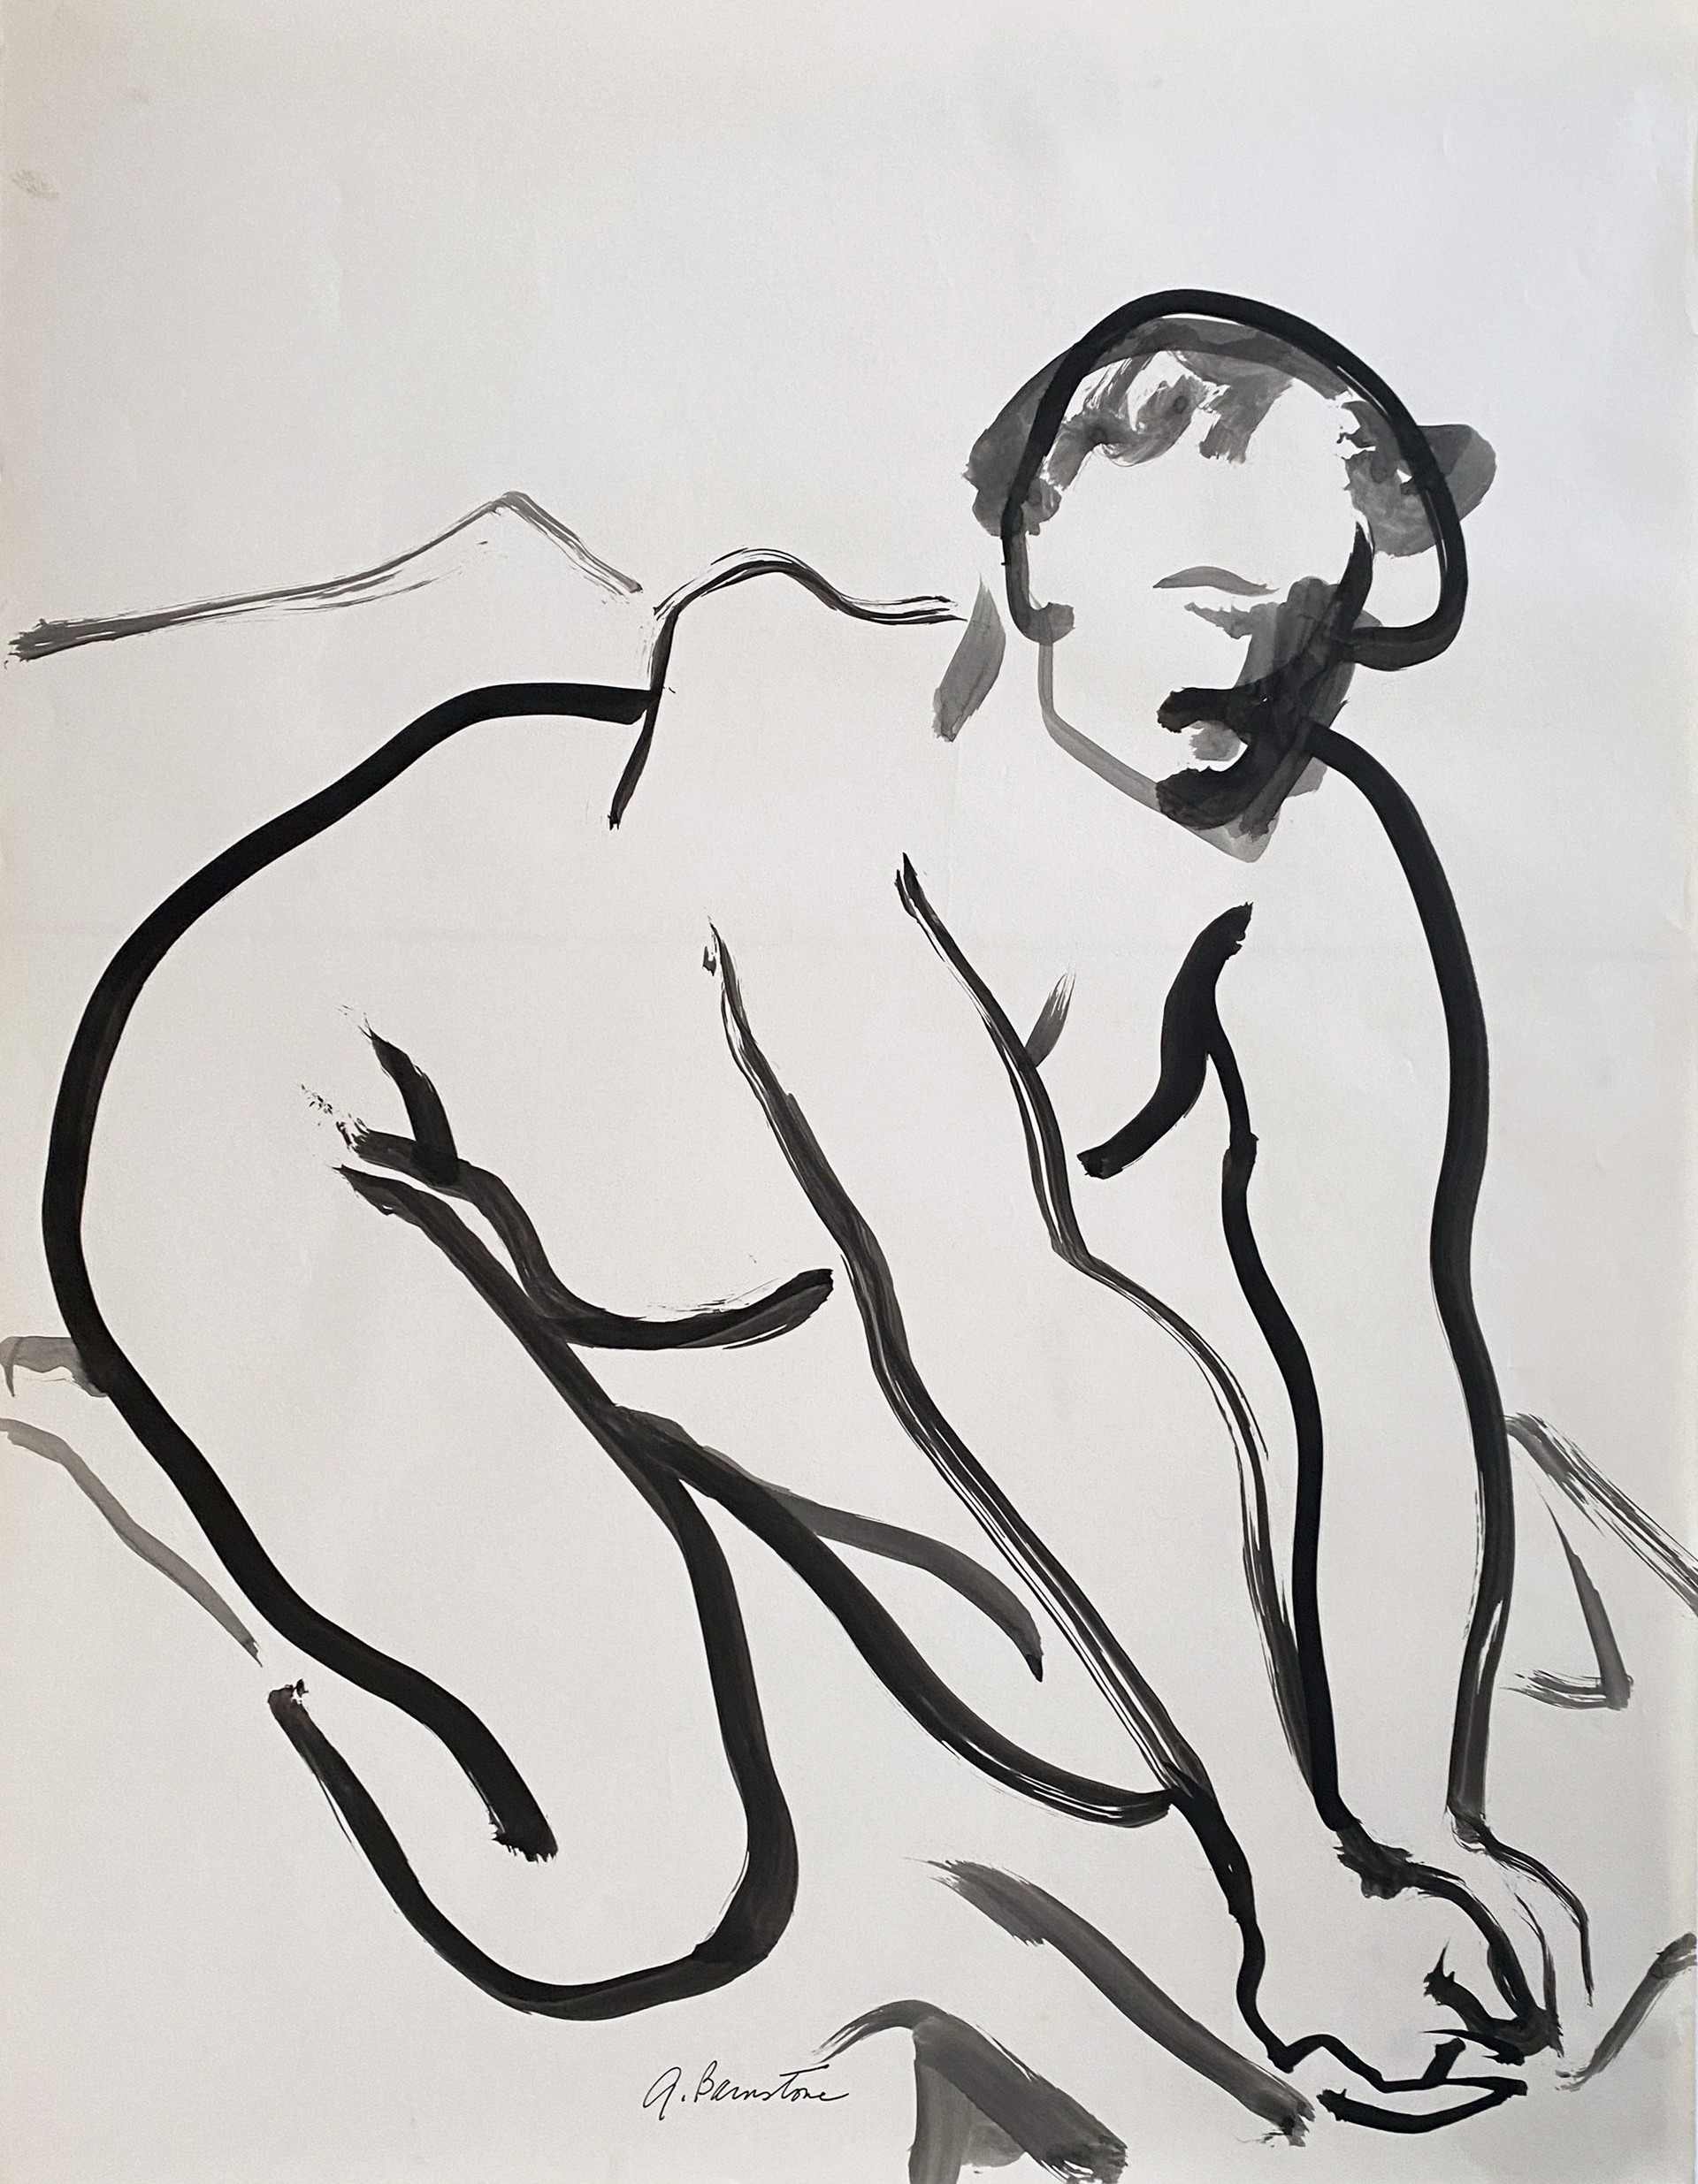 Crouching Nude with Arms in Front by Gertrude Barnstone